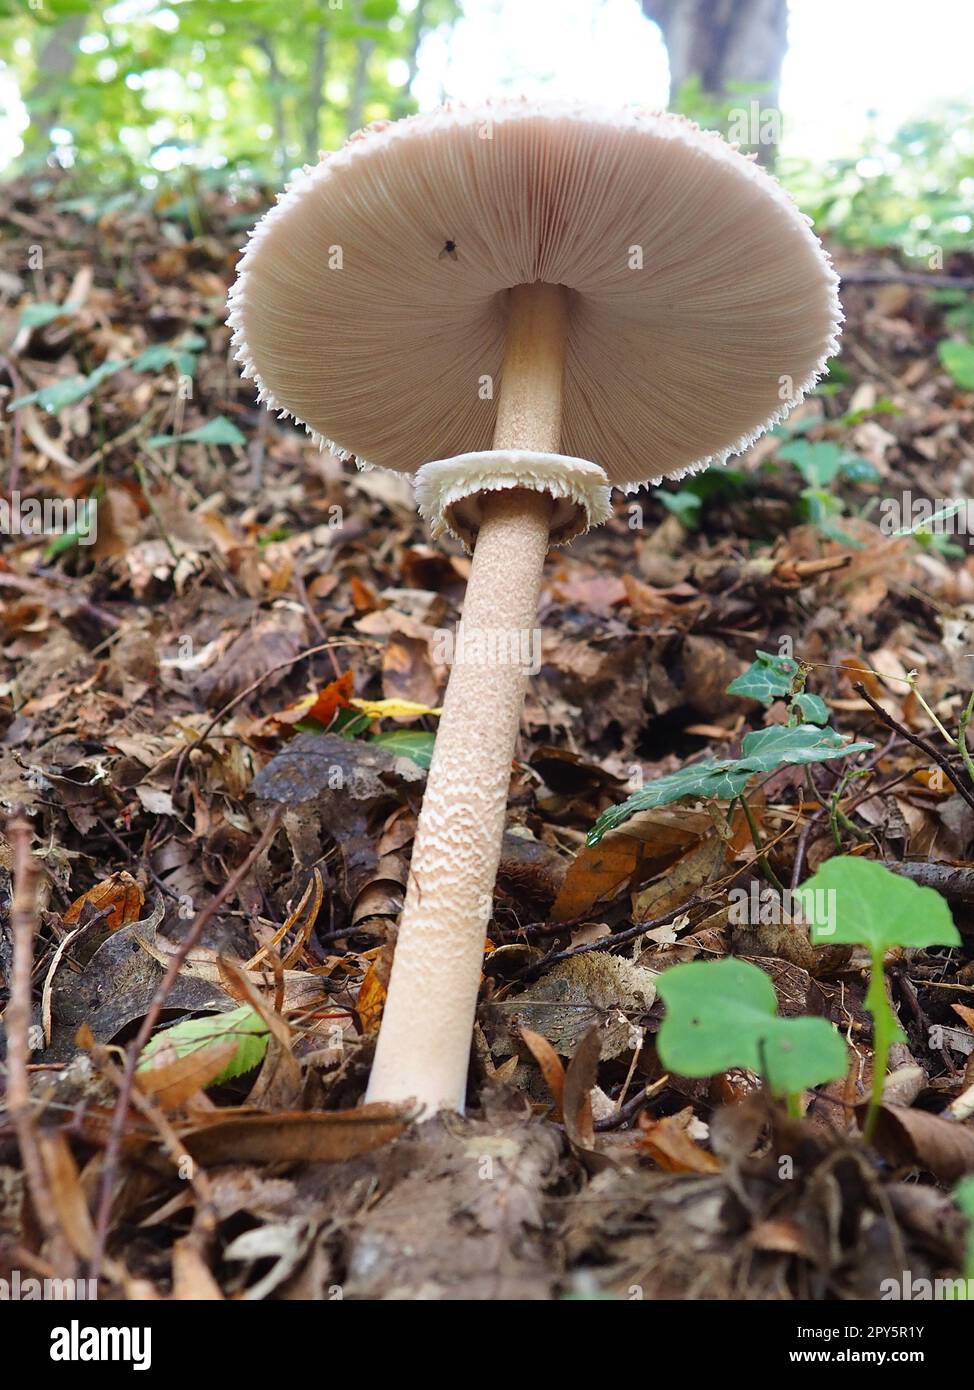 Parasol mushroom Macrolepiota procera is a species of mushrooms of the champignon family. Fruit bodies are cap-shaped, central. Saprotroph, grows on sandy soils in light forests in glades and edges Stock Photo